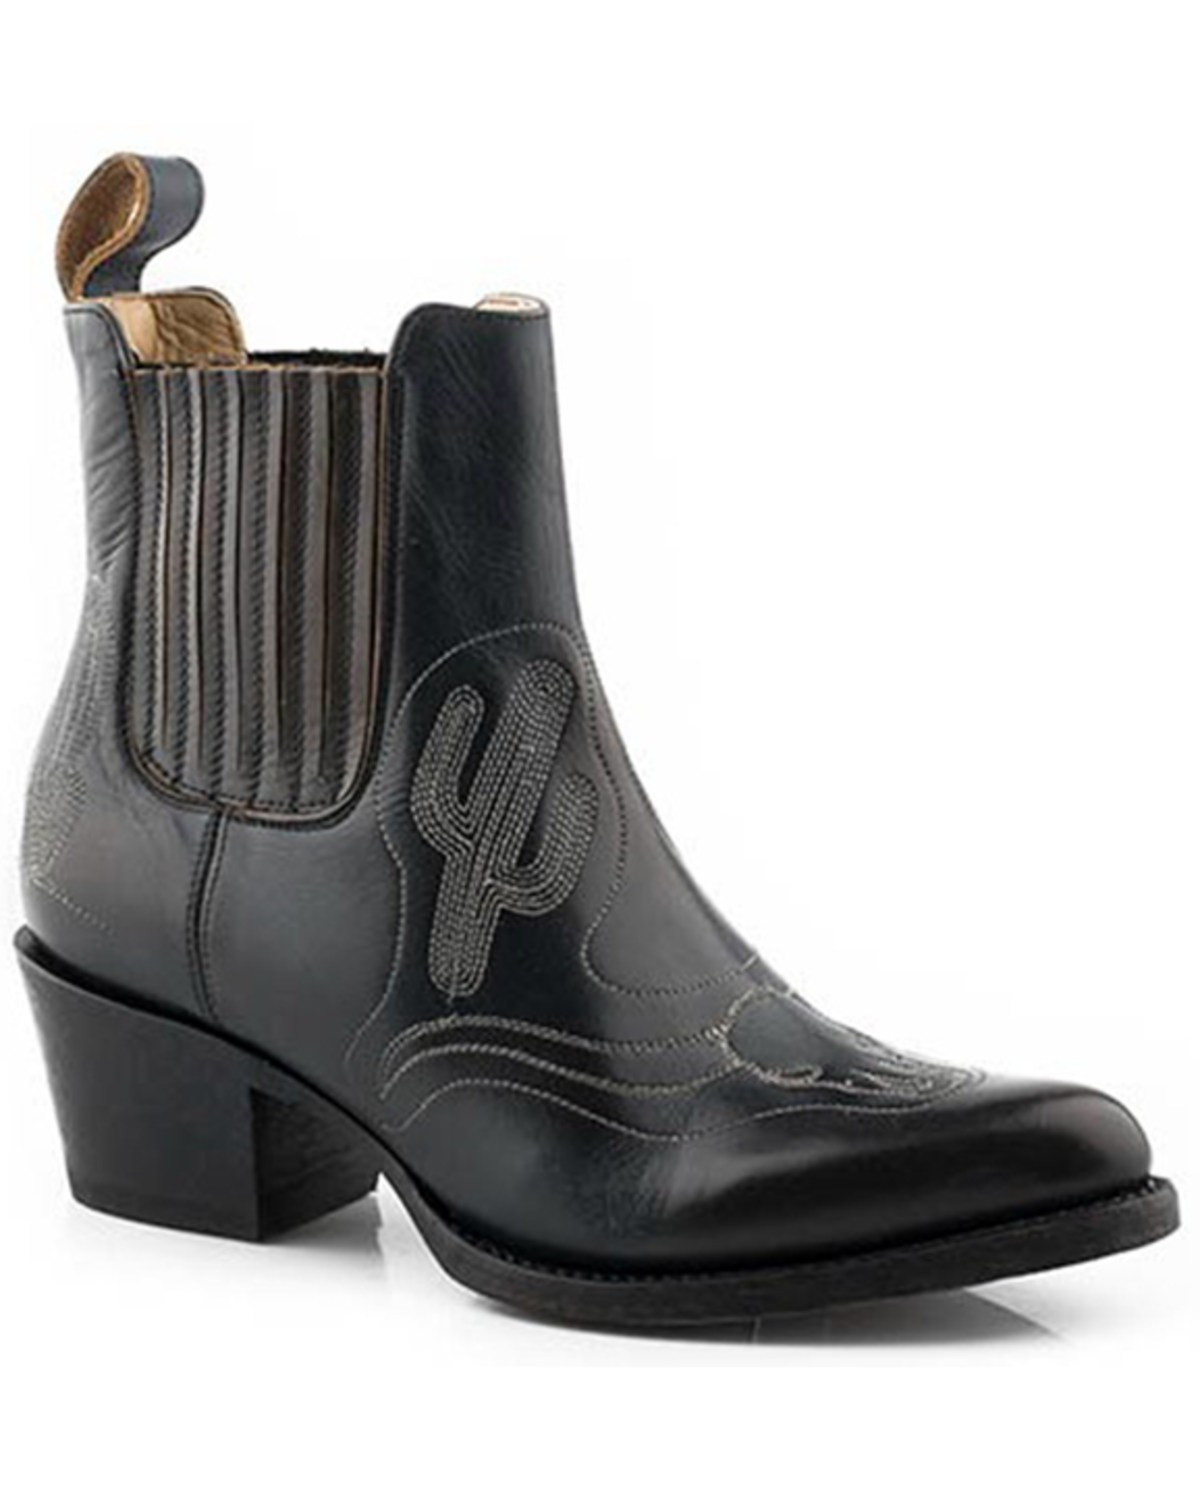 Stetson Women's Sedona Leather Boots - Pointed Toe